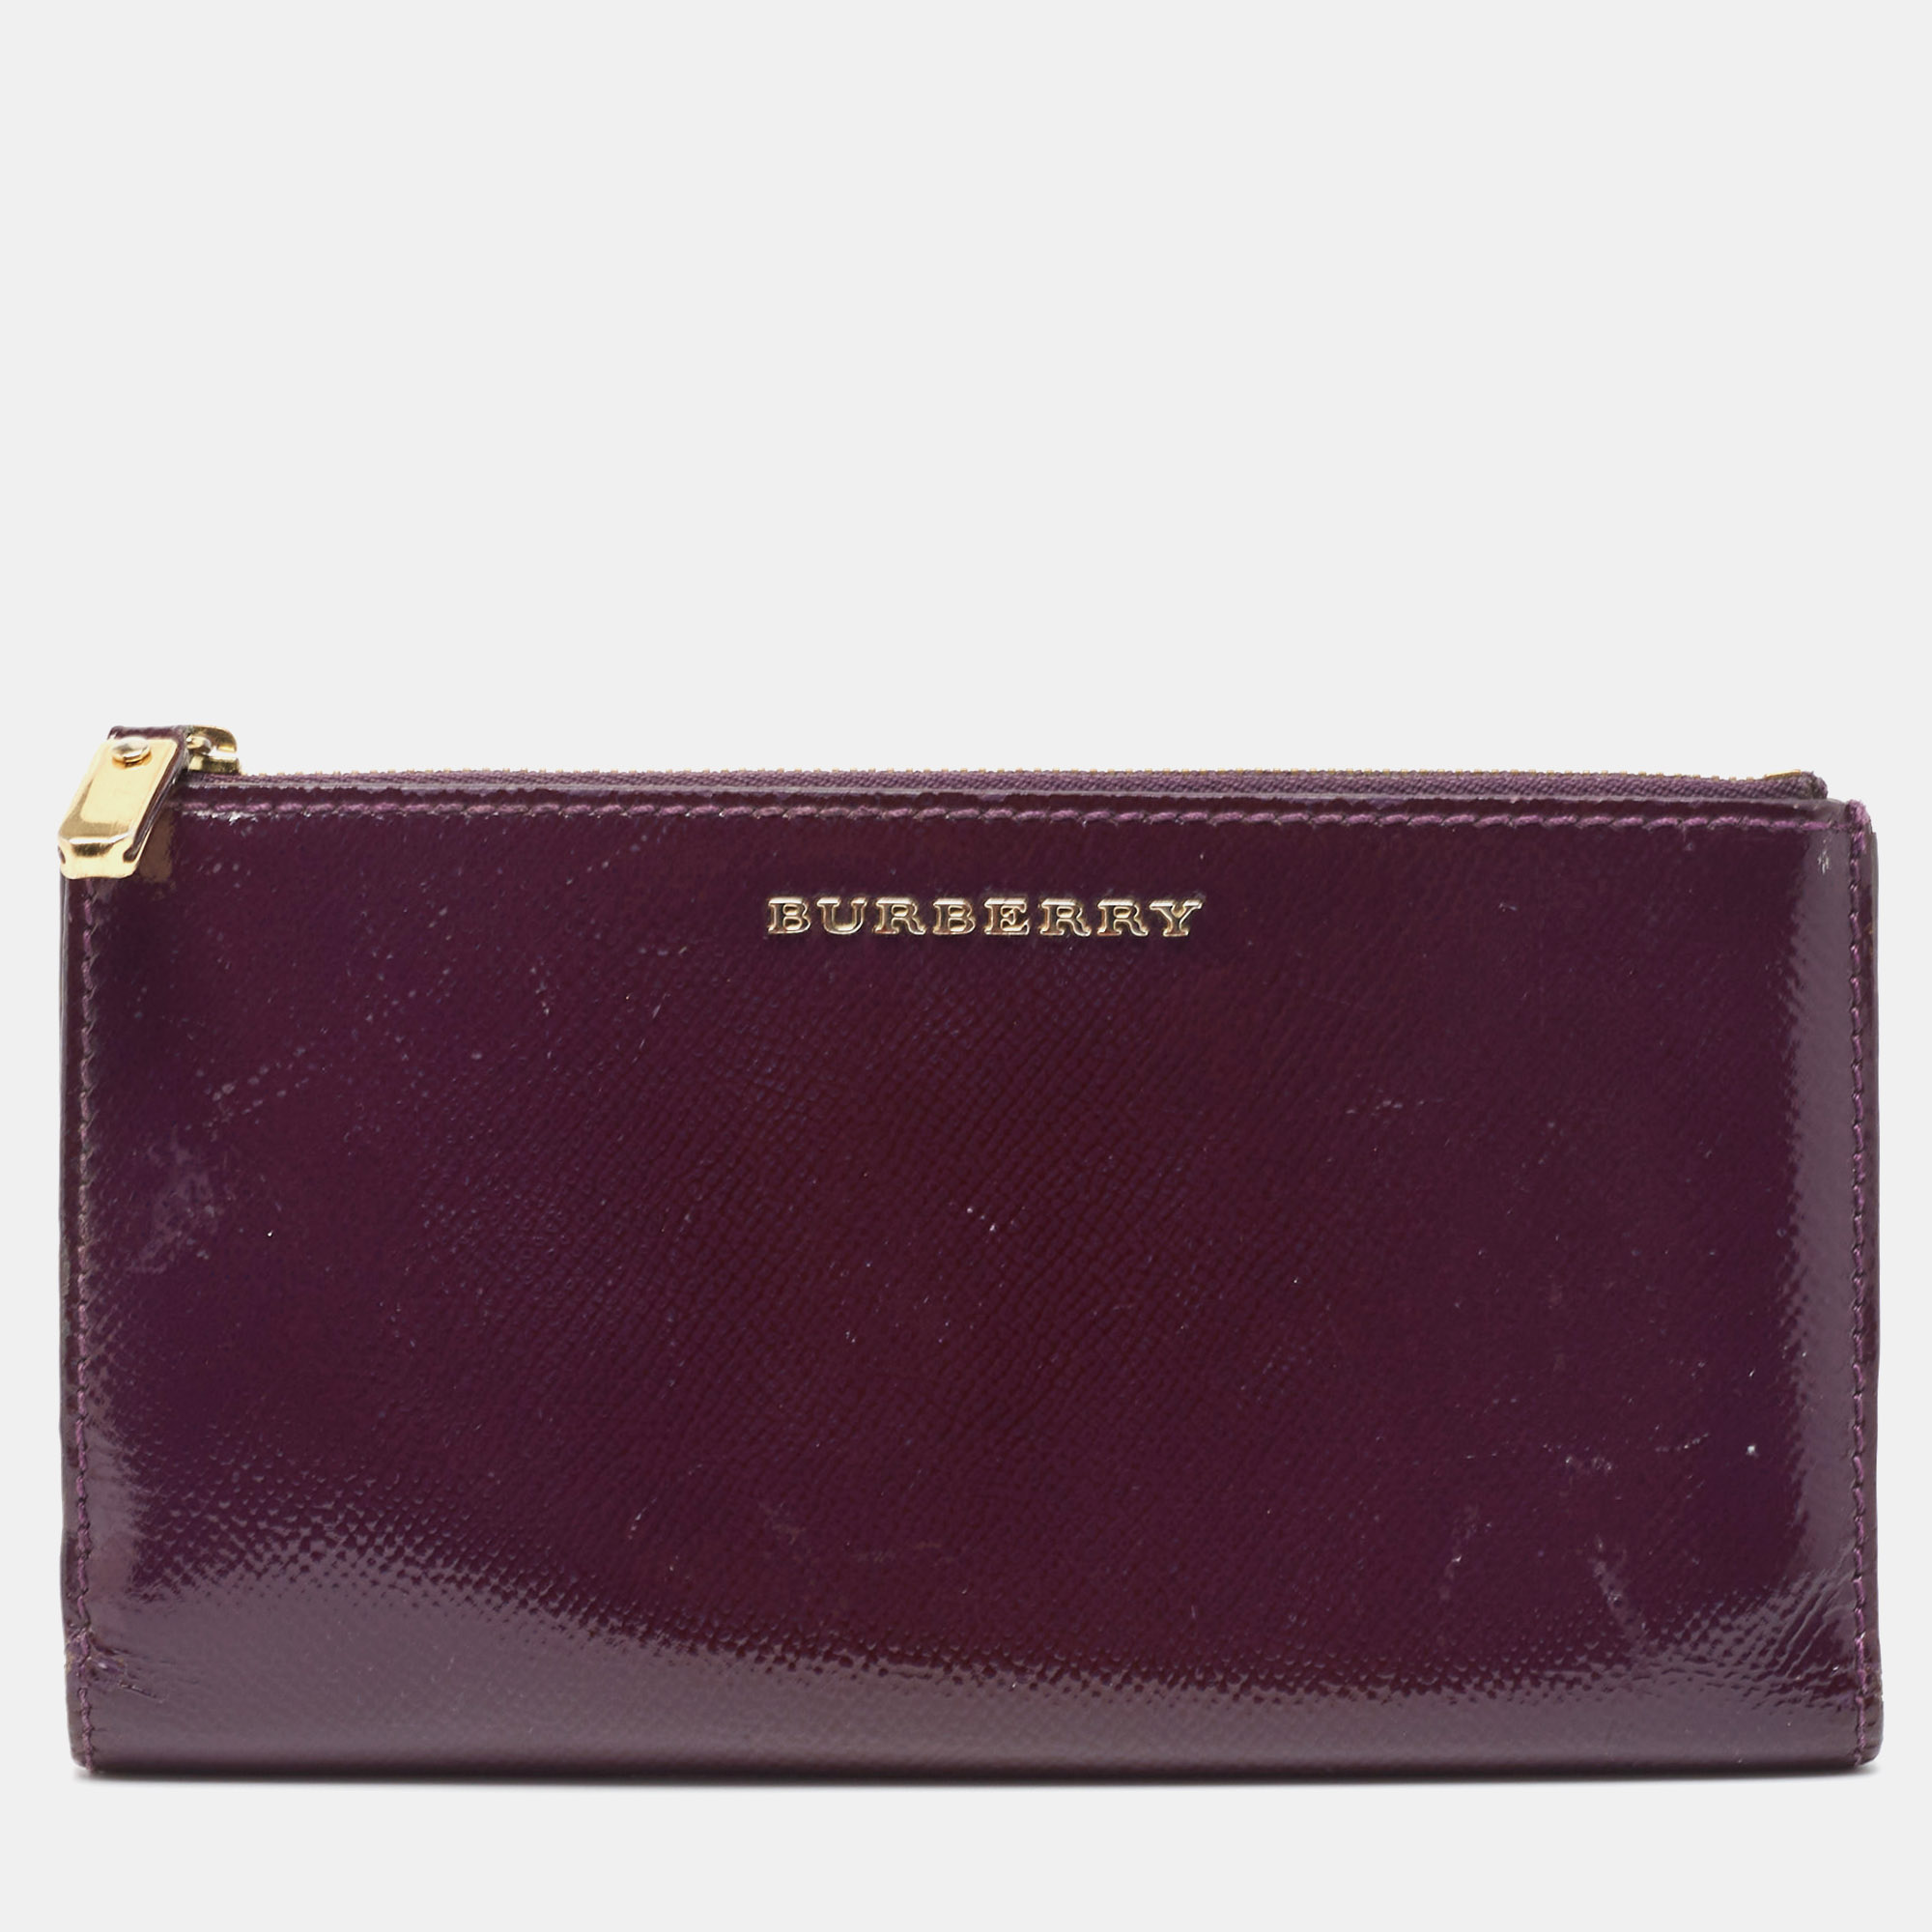 Pre-owned Burberry Purple Patent Leather Zip Bifold Wallet